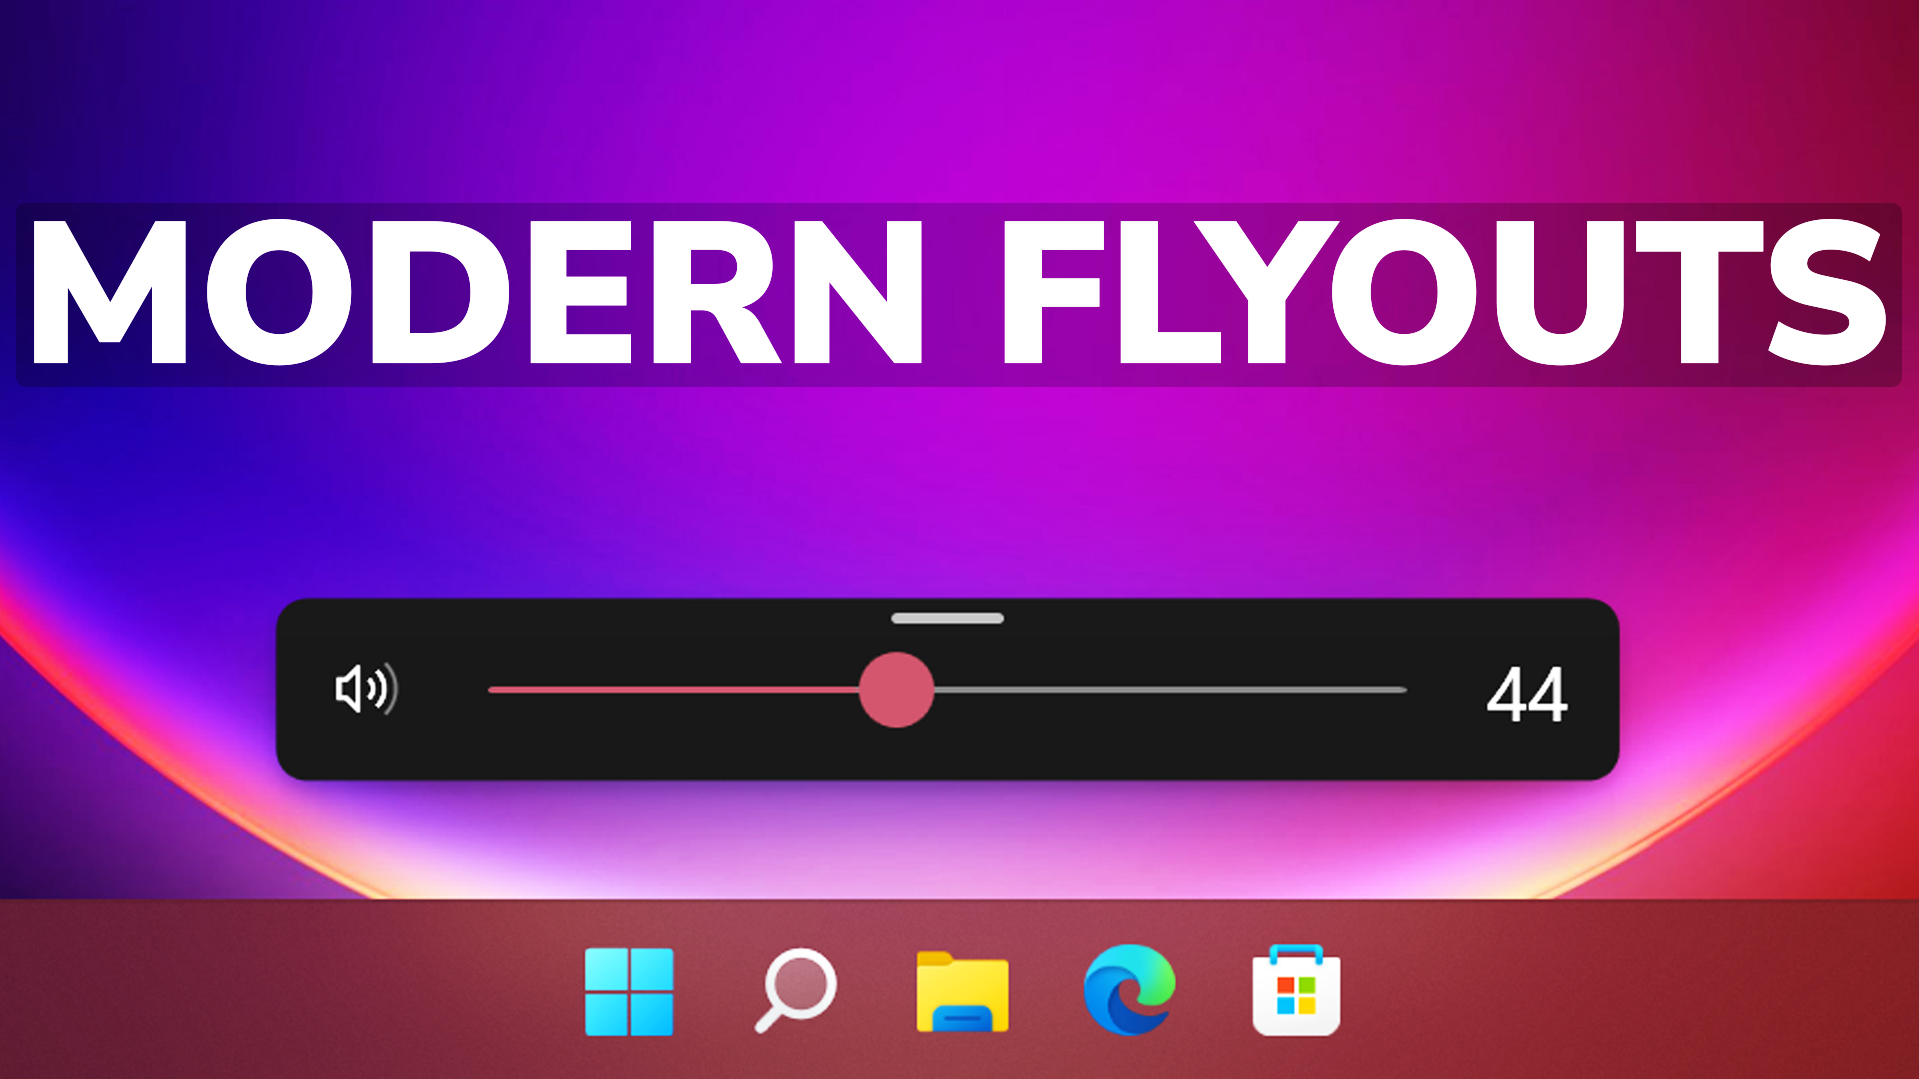 How to get Modern Flyouts in Windows 11 - Tech Based